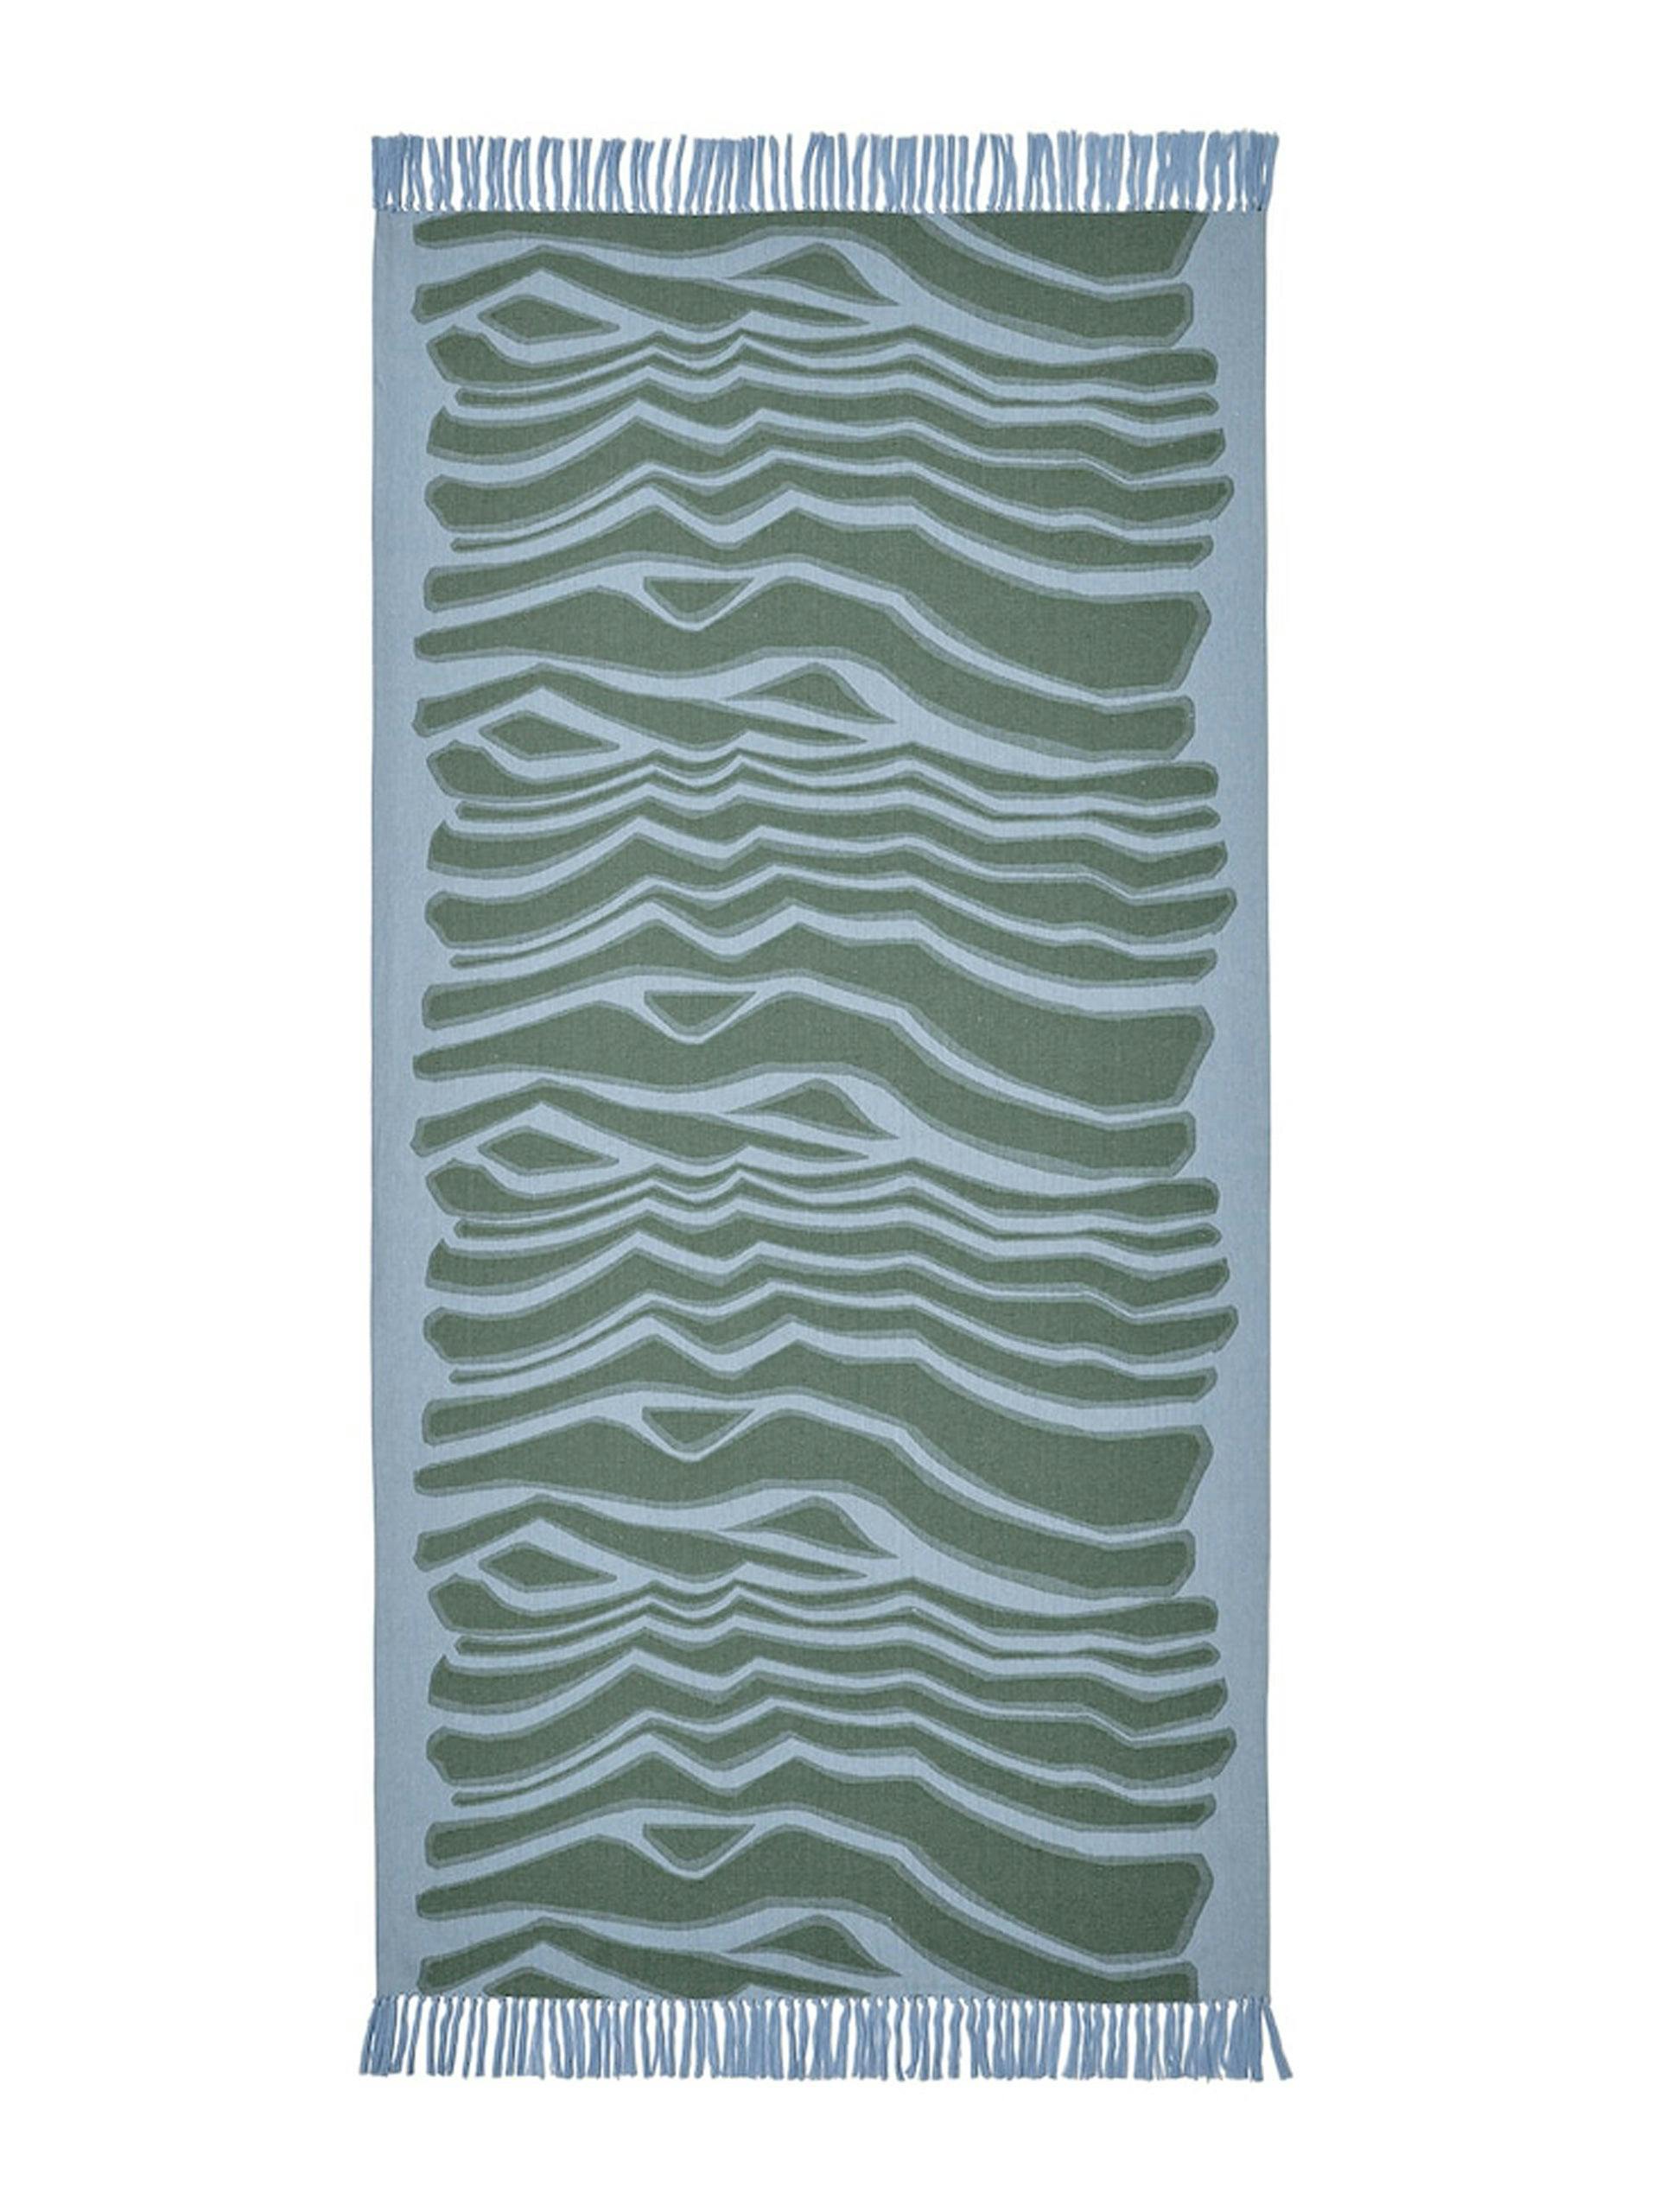 Blue and green patterned towel